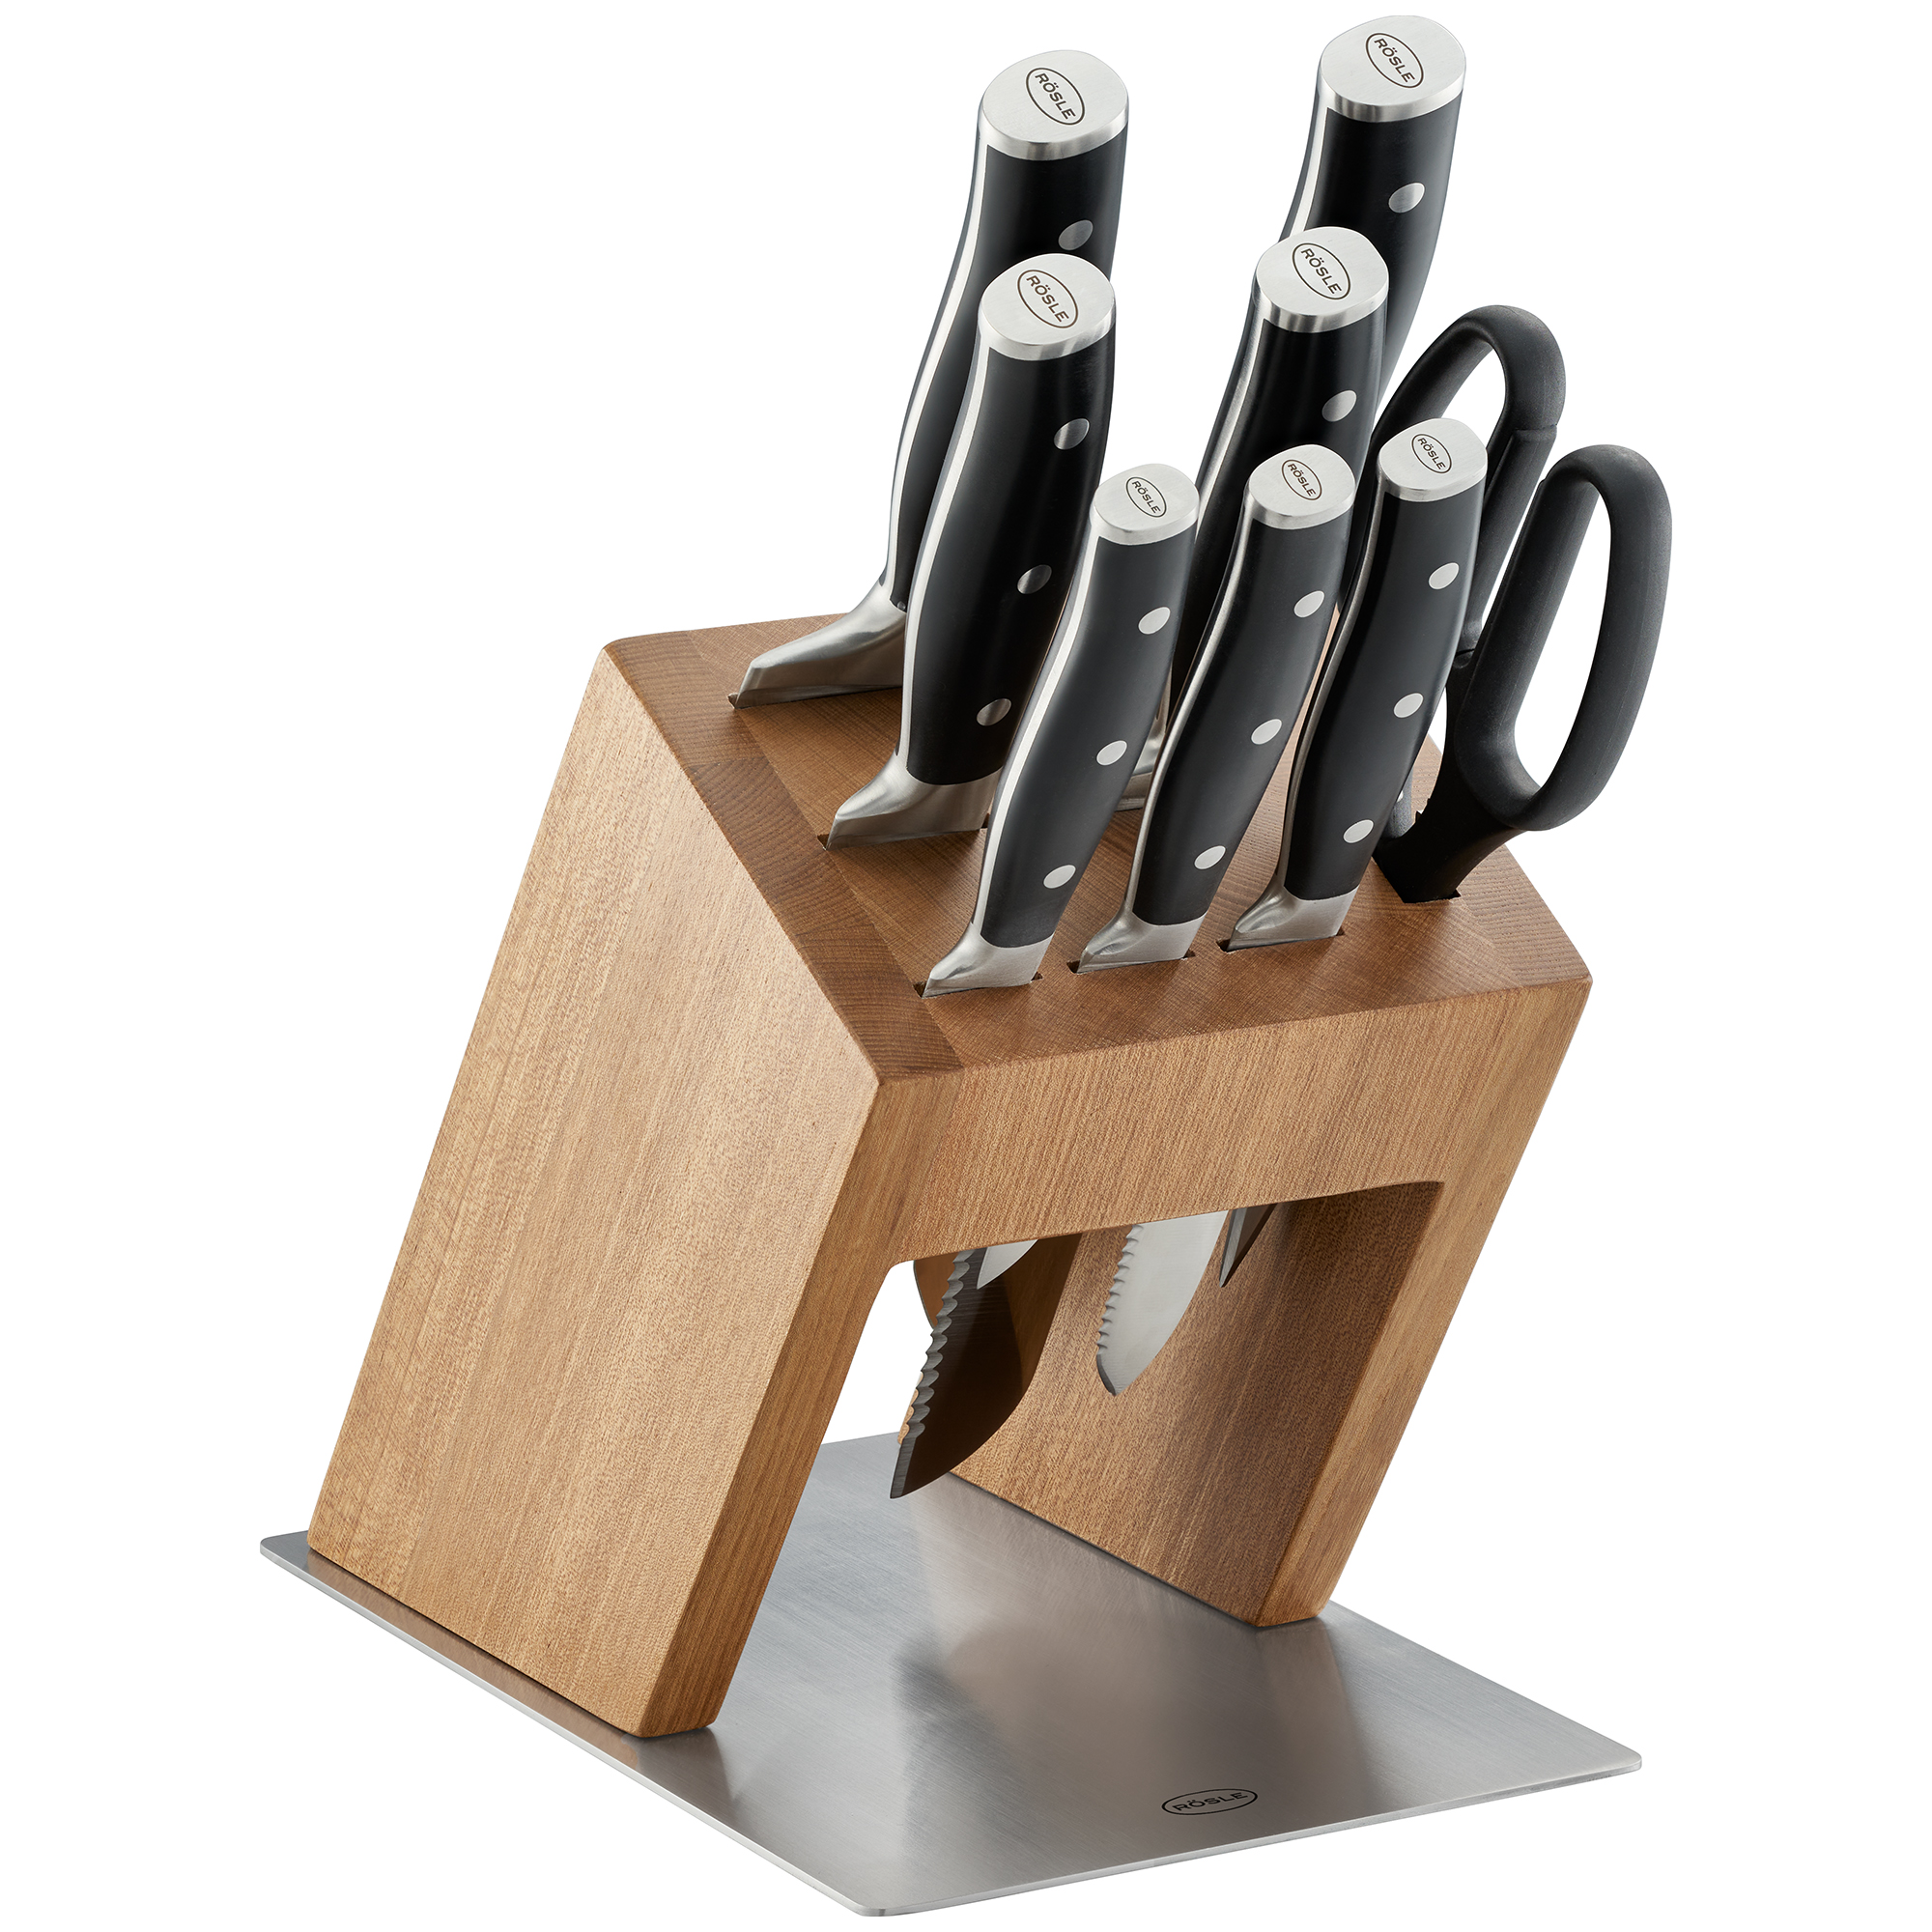 Knife block "KnifeX" without knives